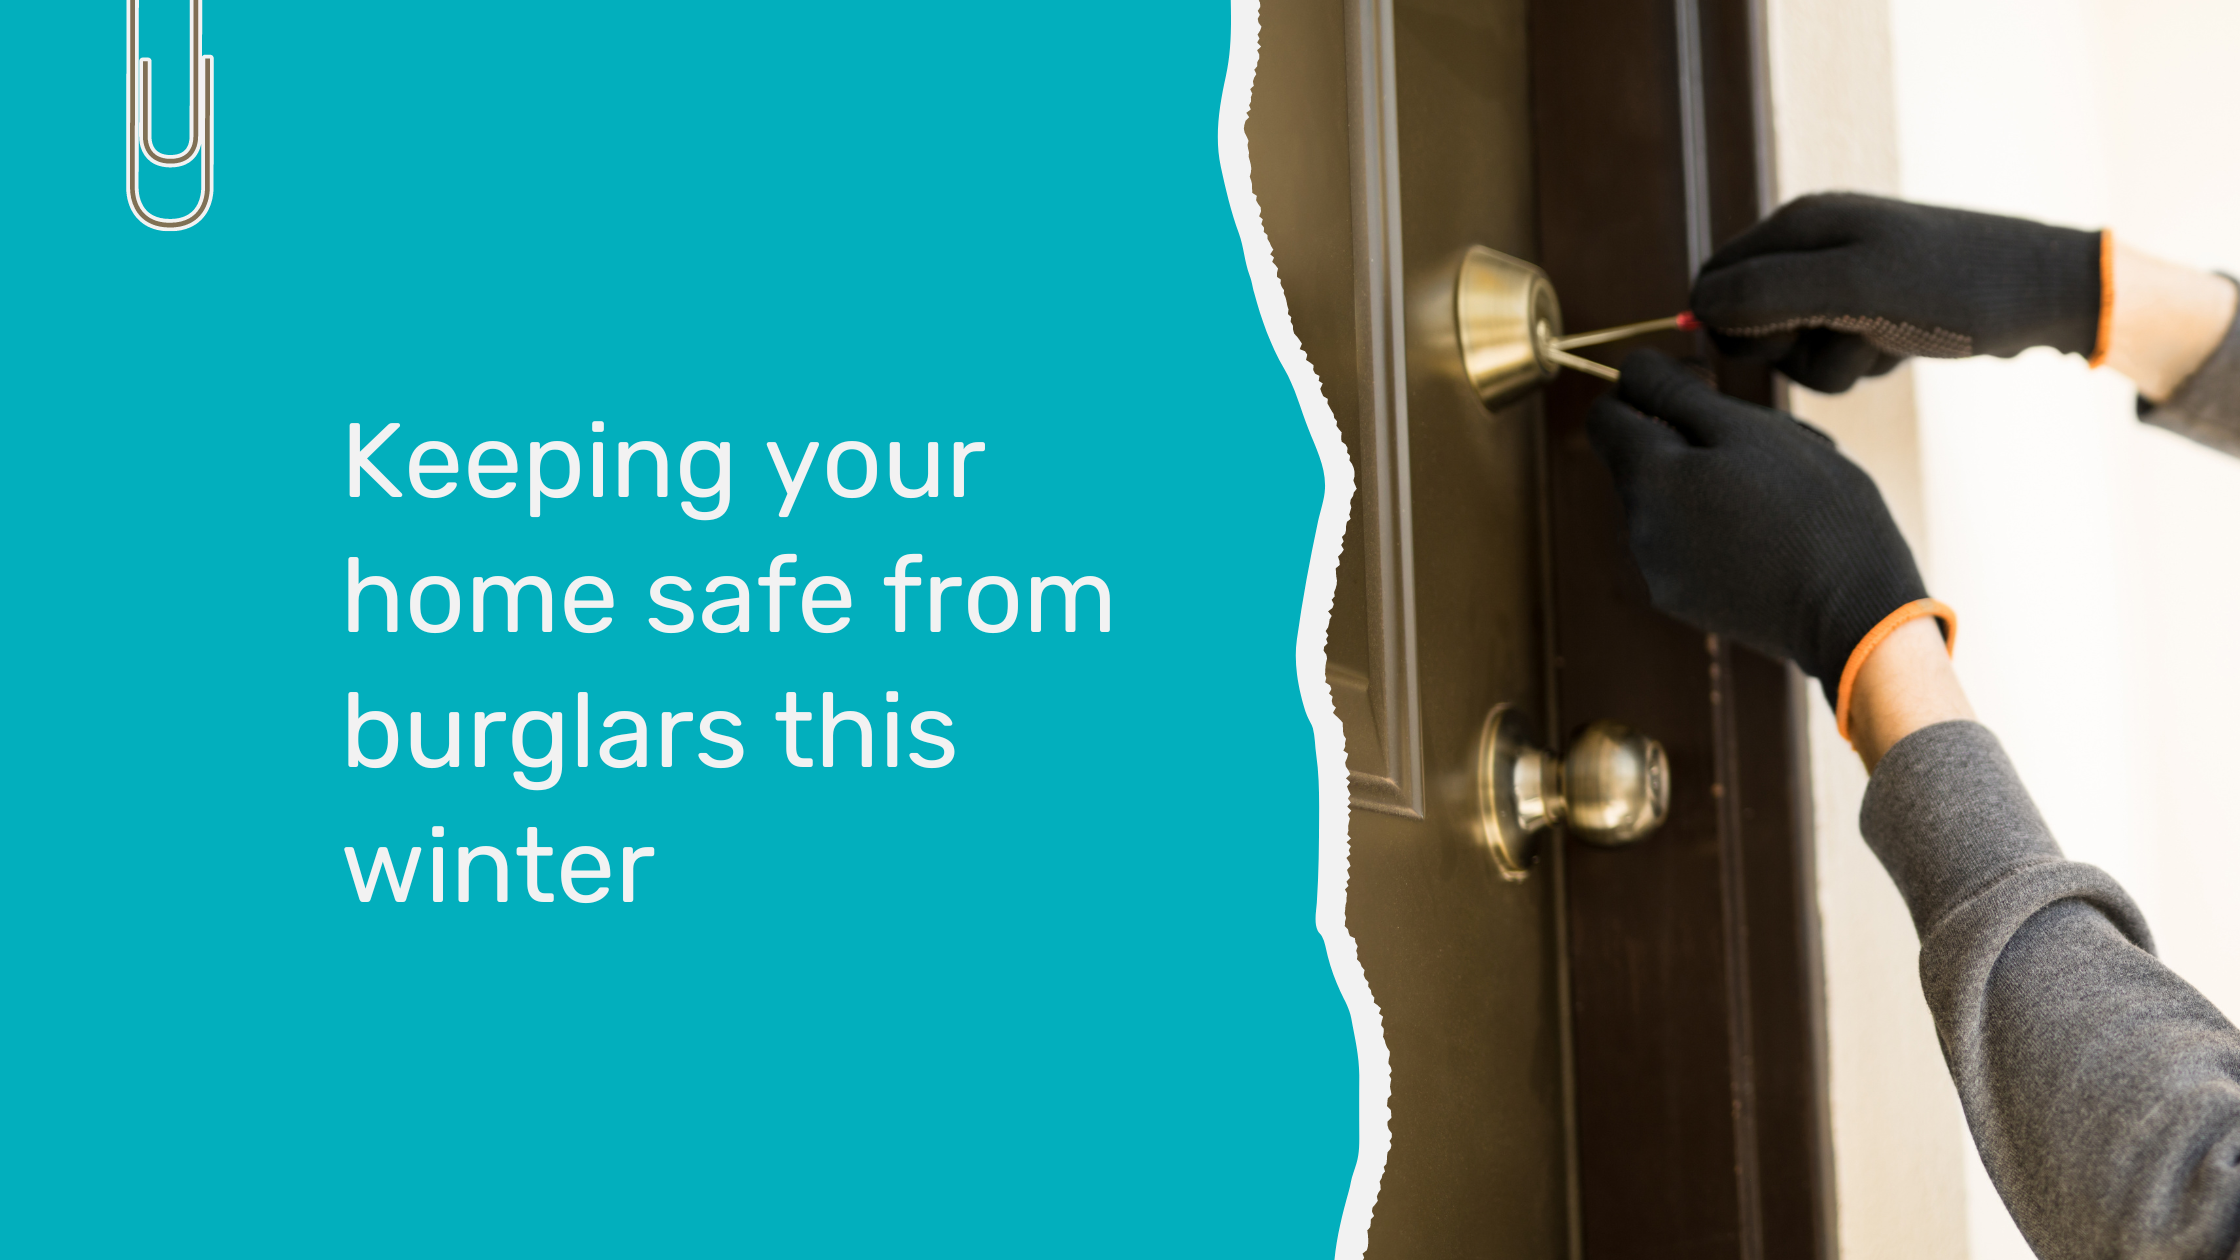 Keeping your home safe from burglars this winter